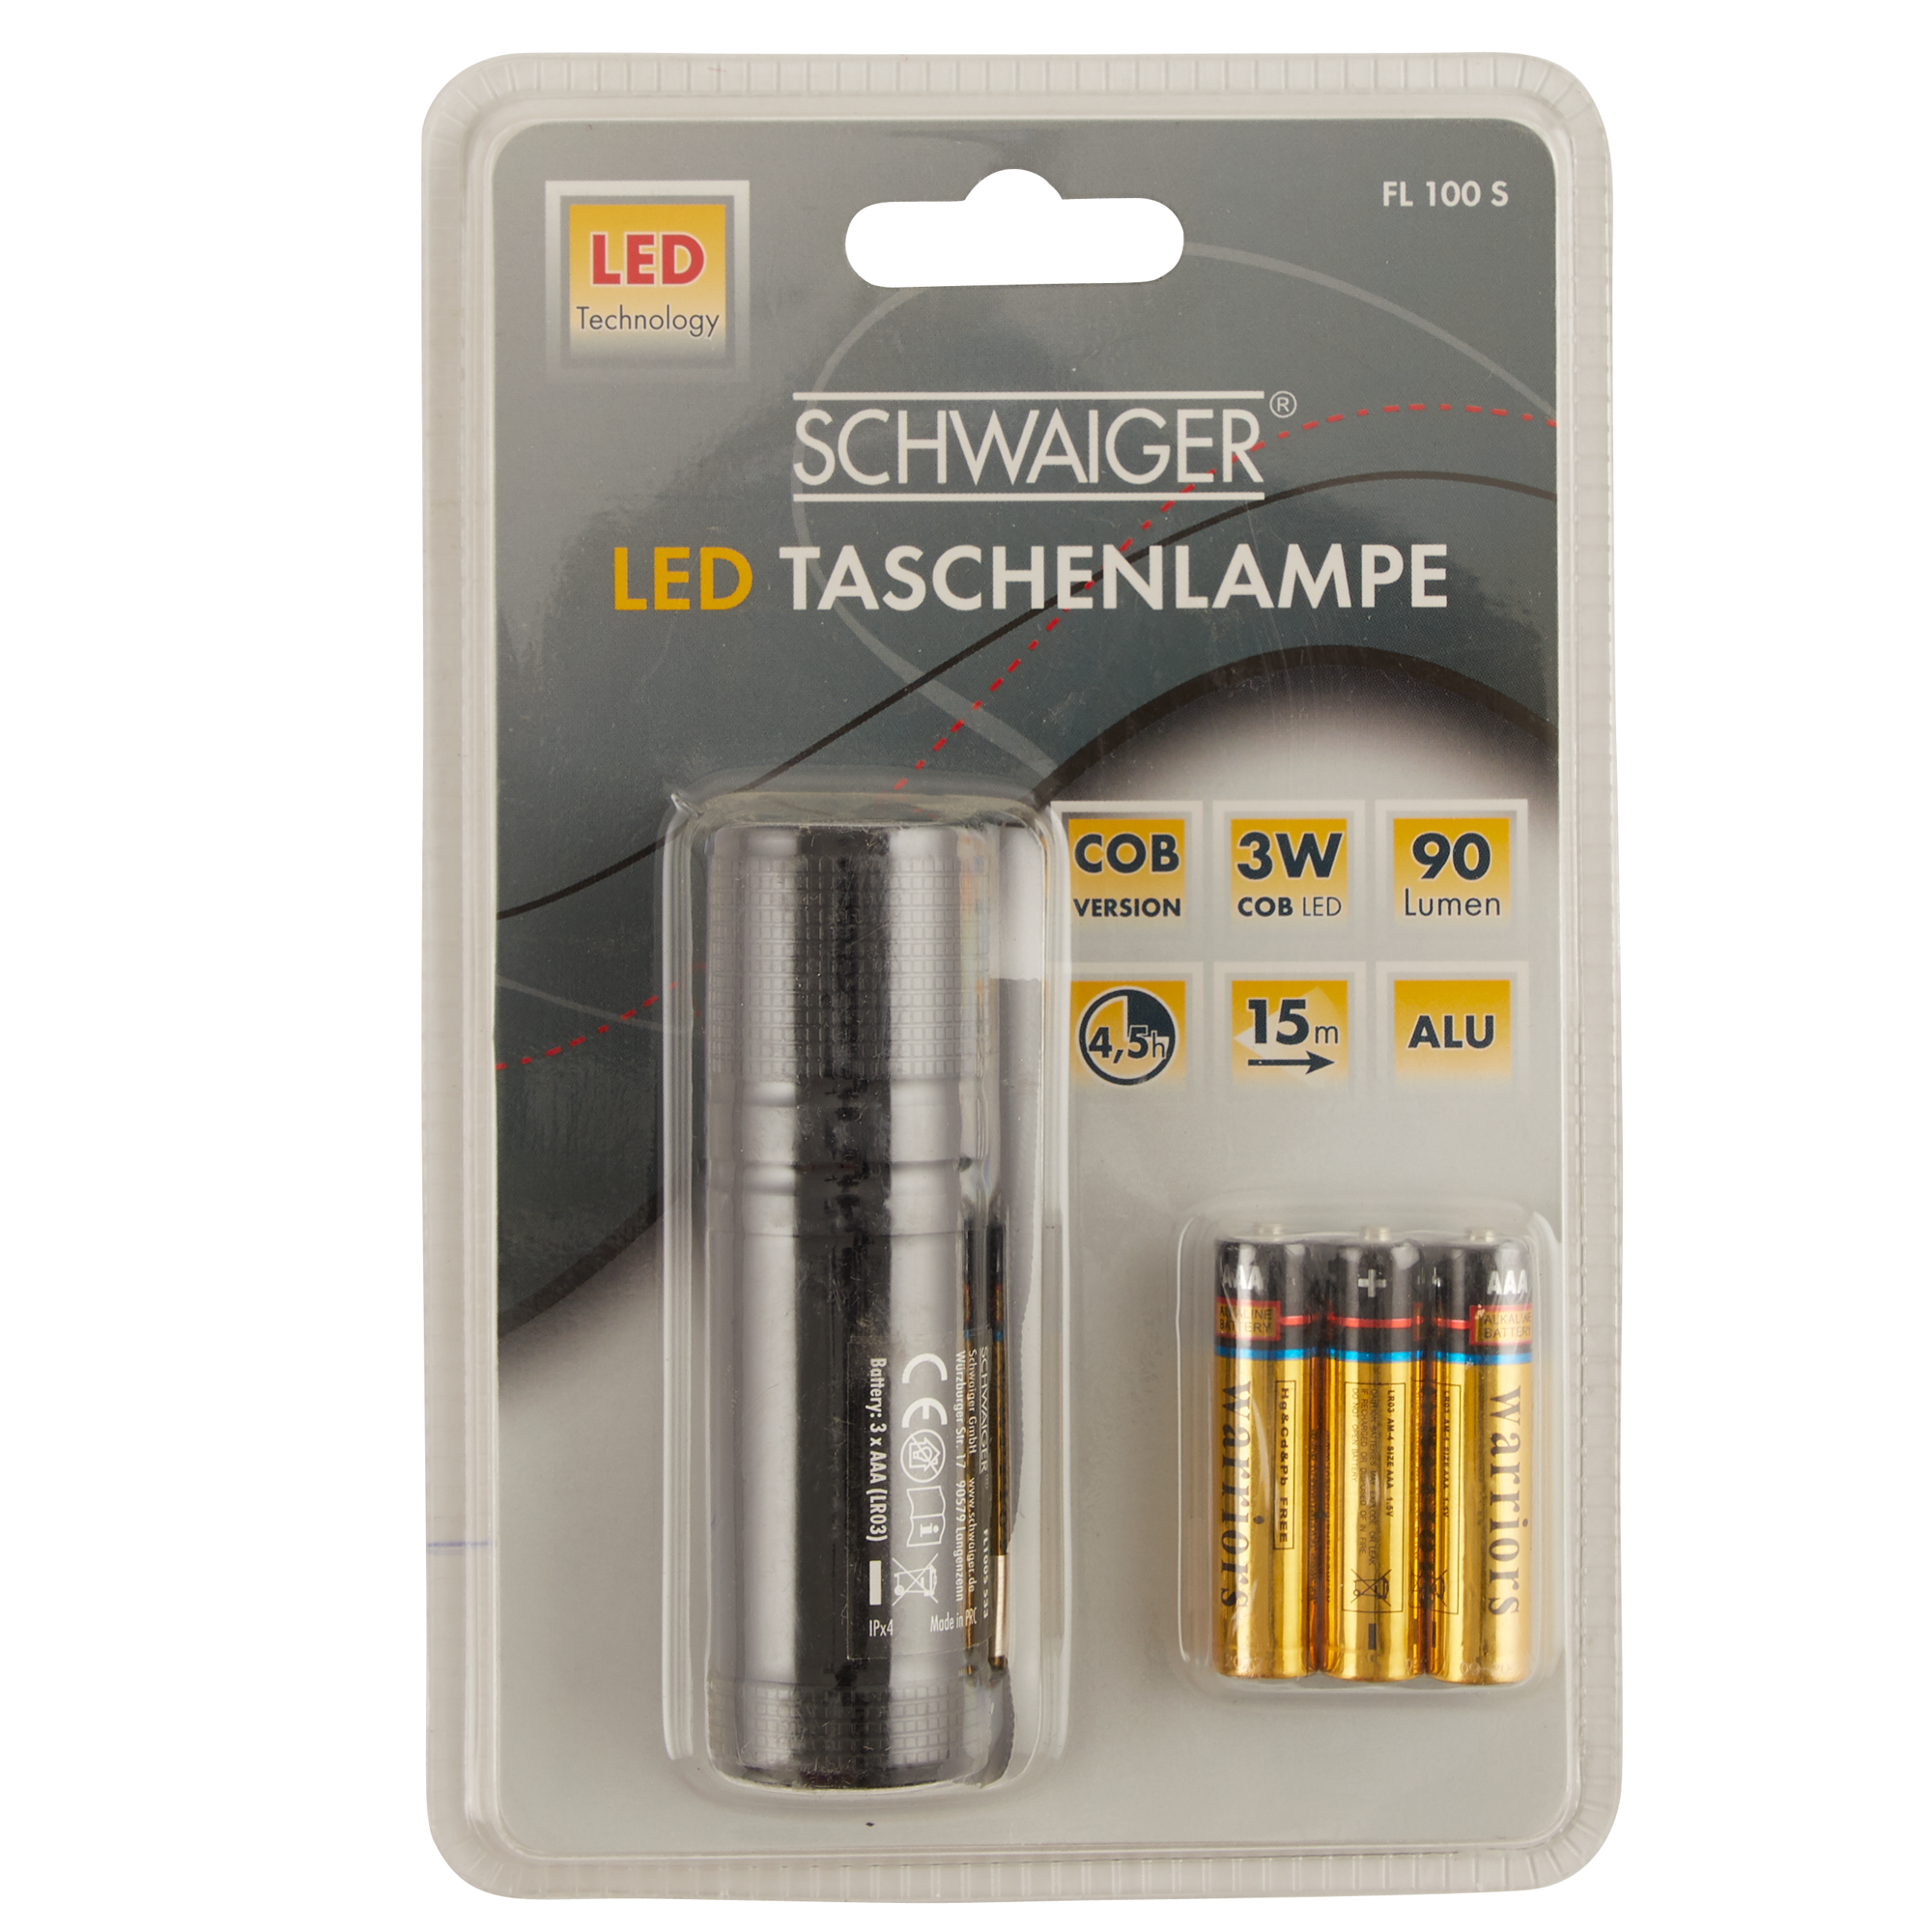 LED Taschenlampe Alu FL 100 S + product picture